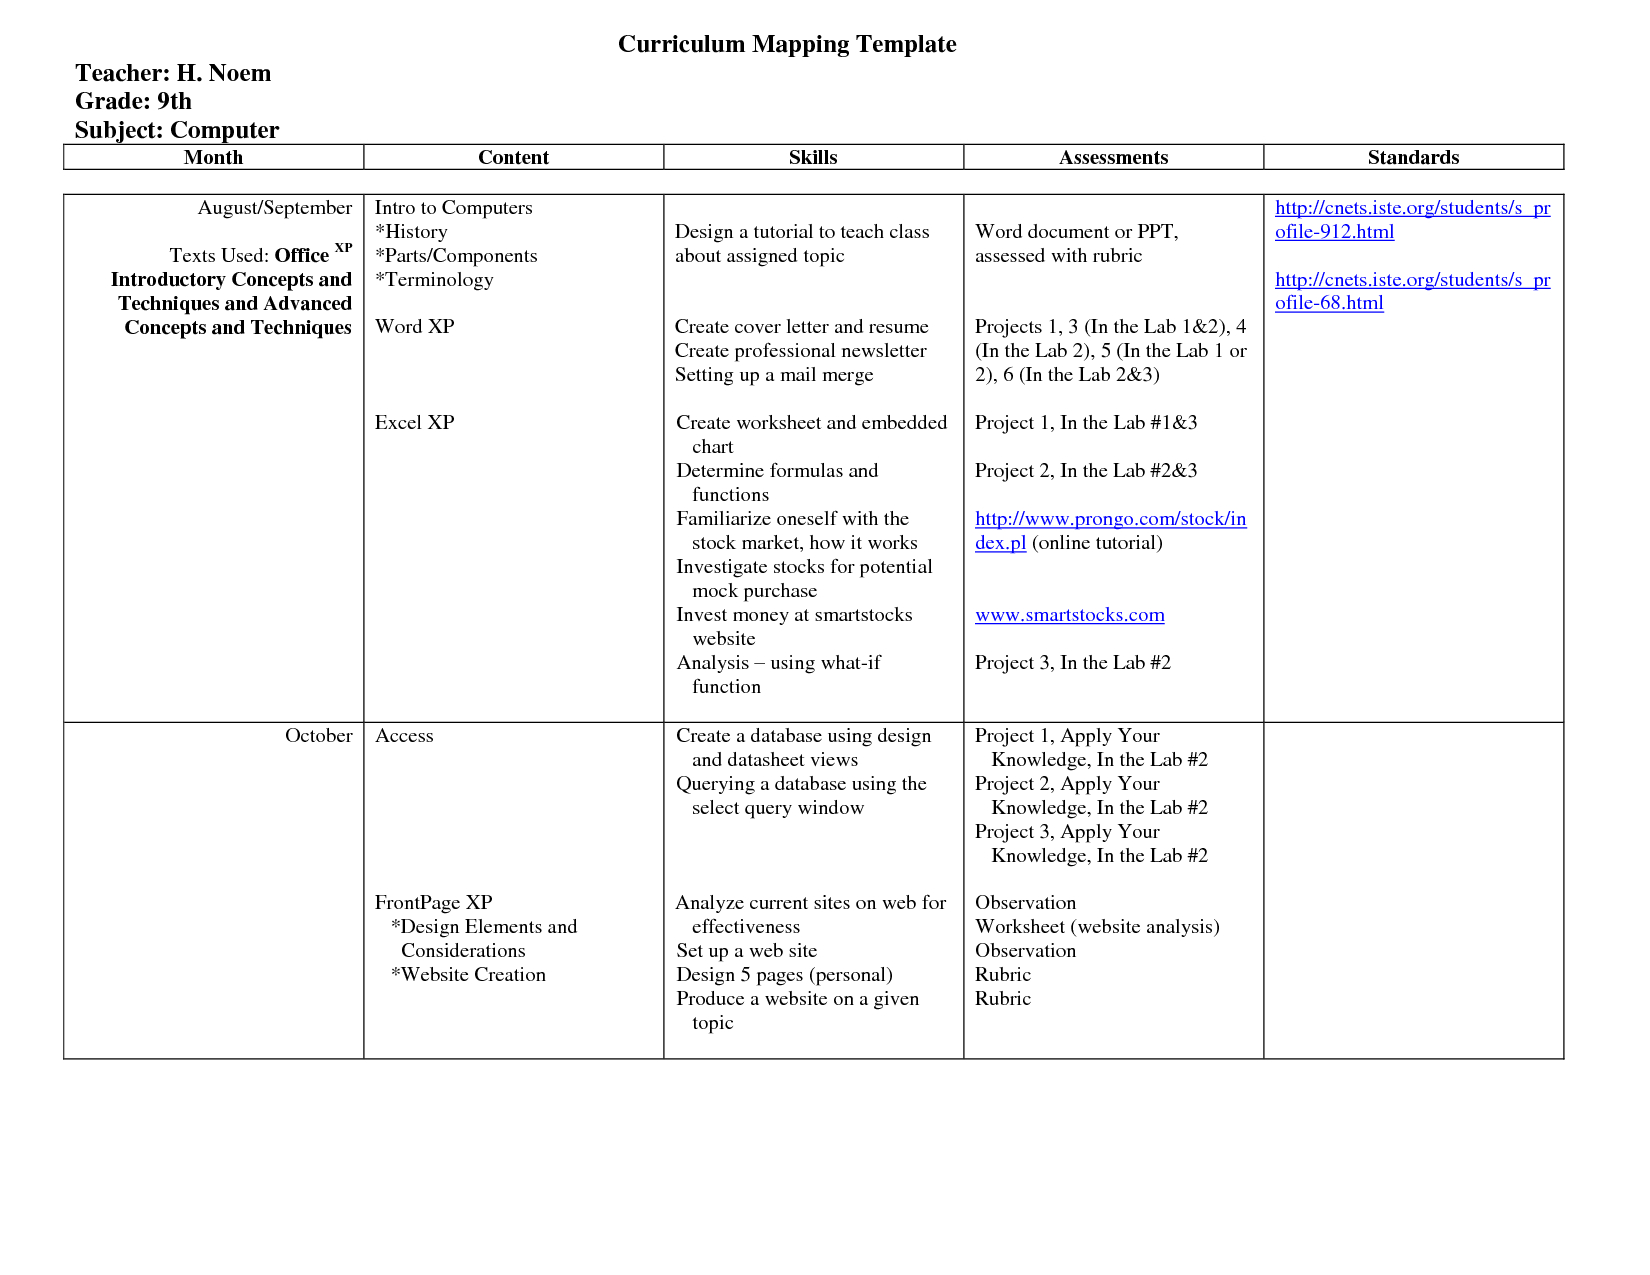 25 Images Of Curriculum Mapping Template For Training With Regard To Blank Curriculum Map Template